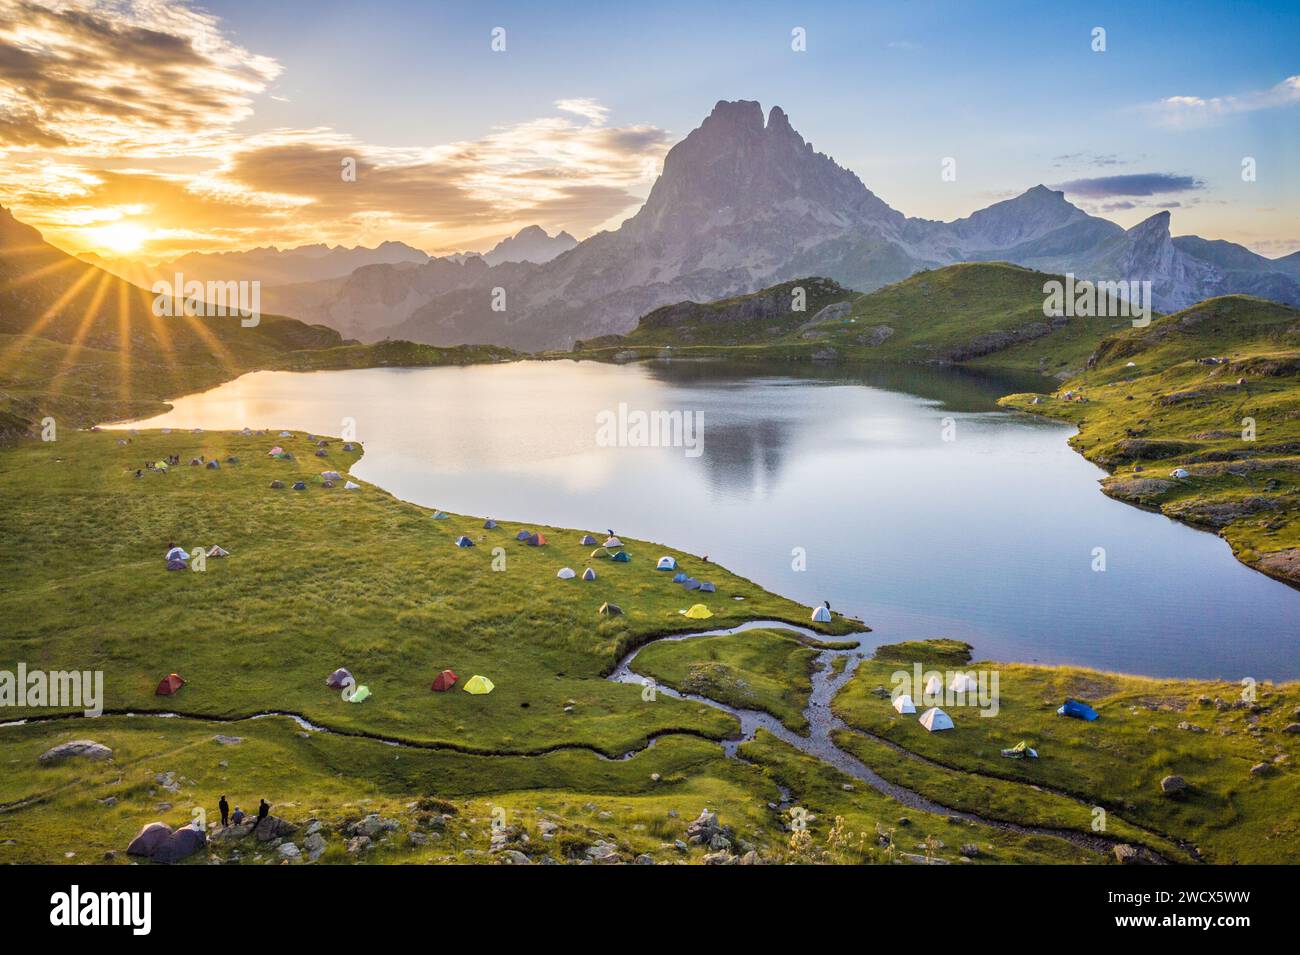 France, Pyrenees Atlantiques, Béarn, Ossau valley, Pyrenees National Park, camp on the edge of the Ayous lake at sunrise, the Pic du Midi d'Ossau in the background Stock Photo